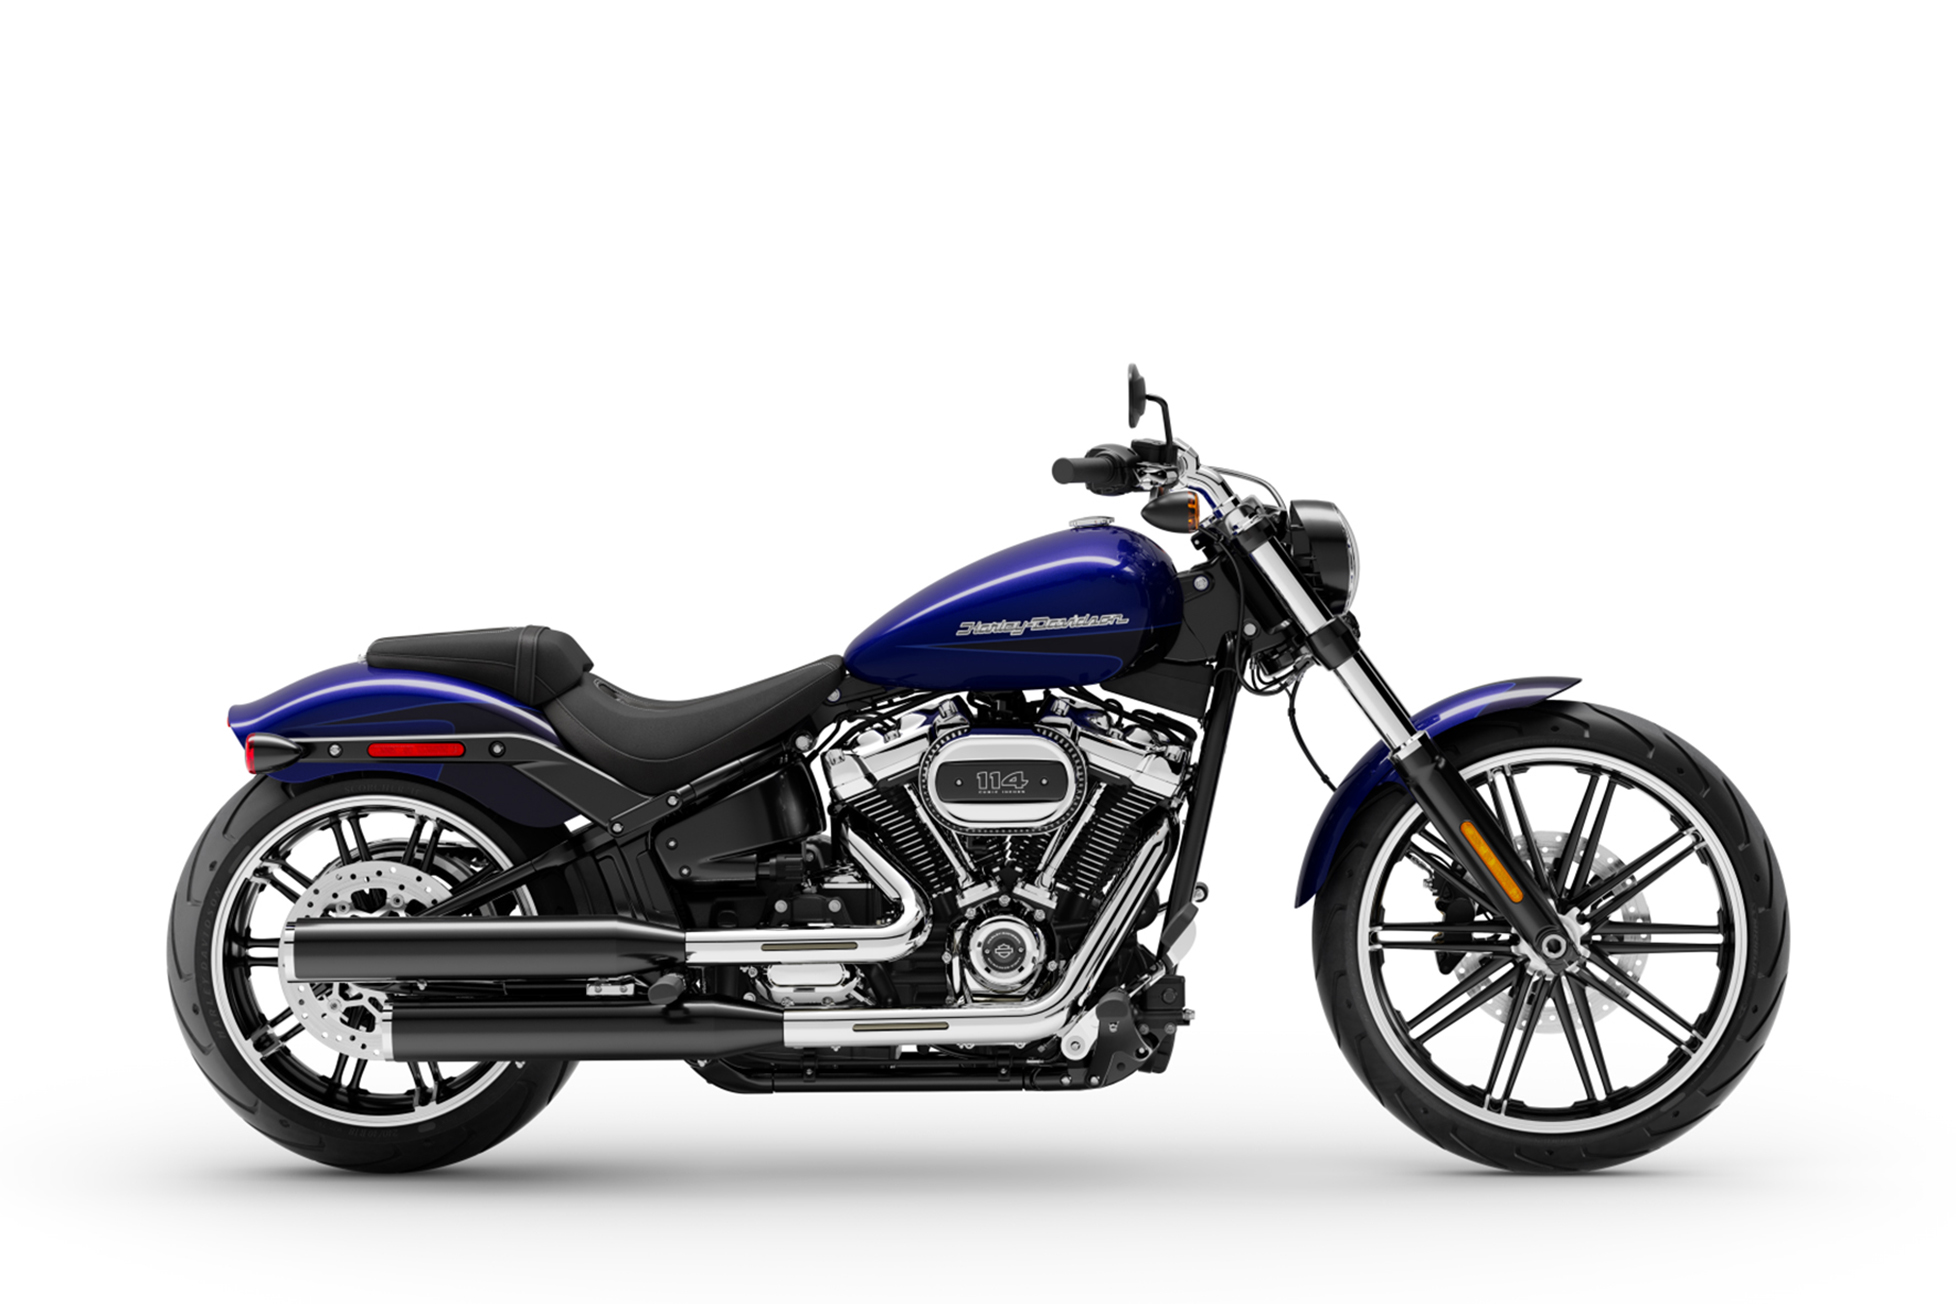 2020 Breakout Motorcycle Specs & Pricing | Harley-Davidson USA